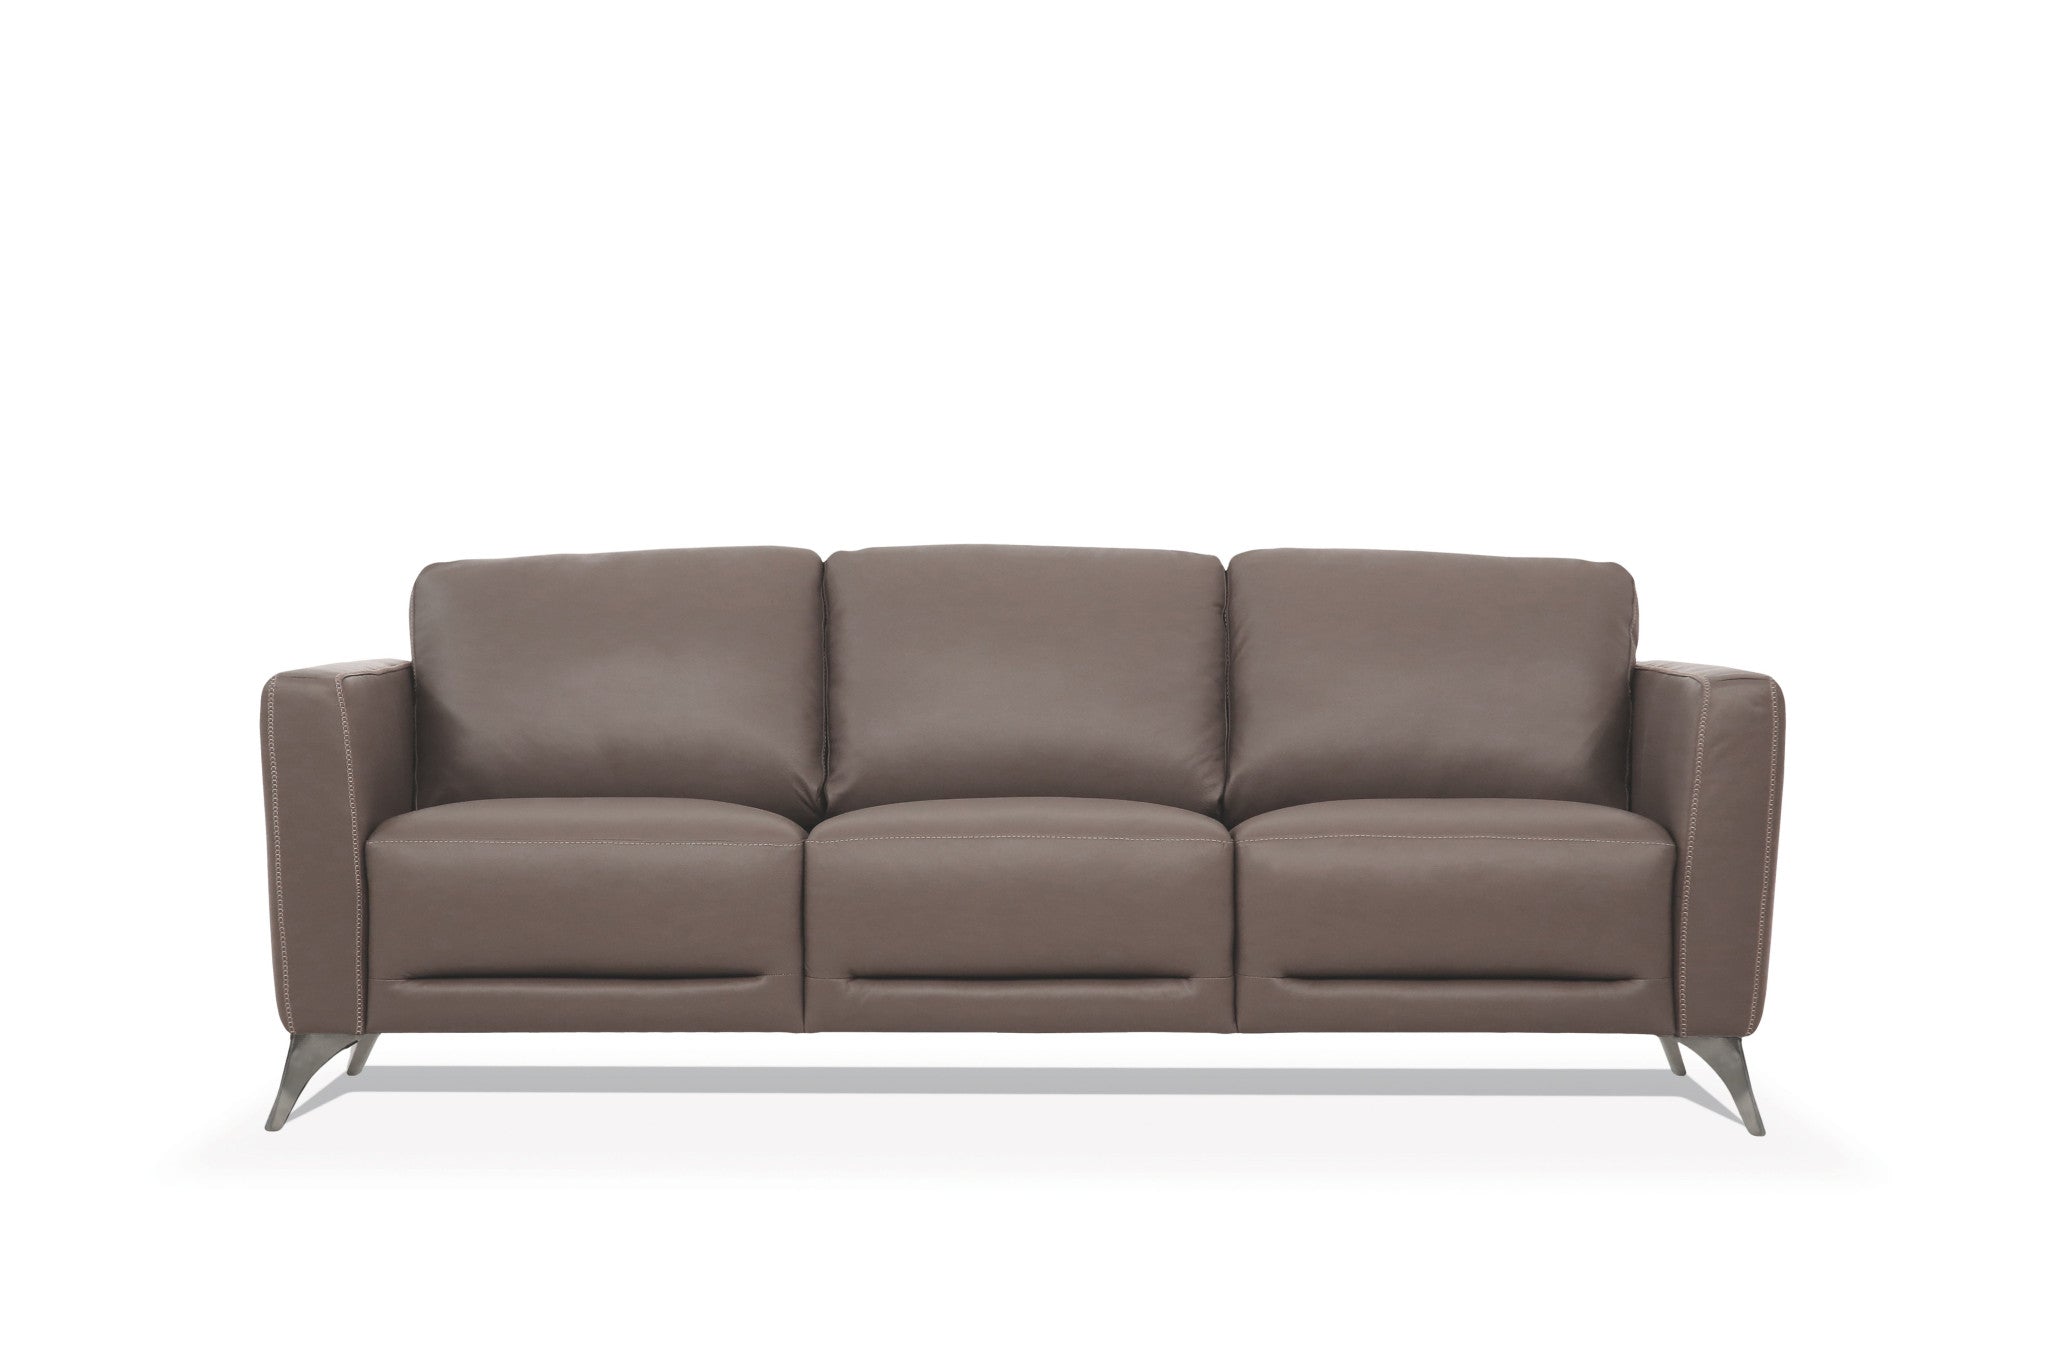 83" Taupe Leather And Black Sofa